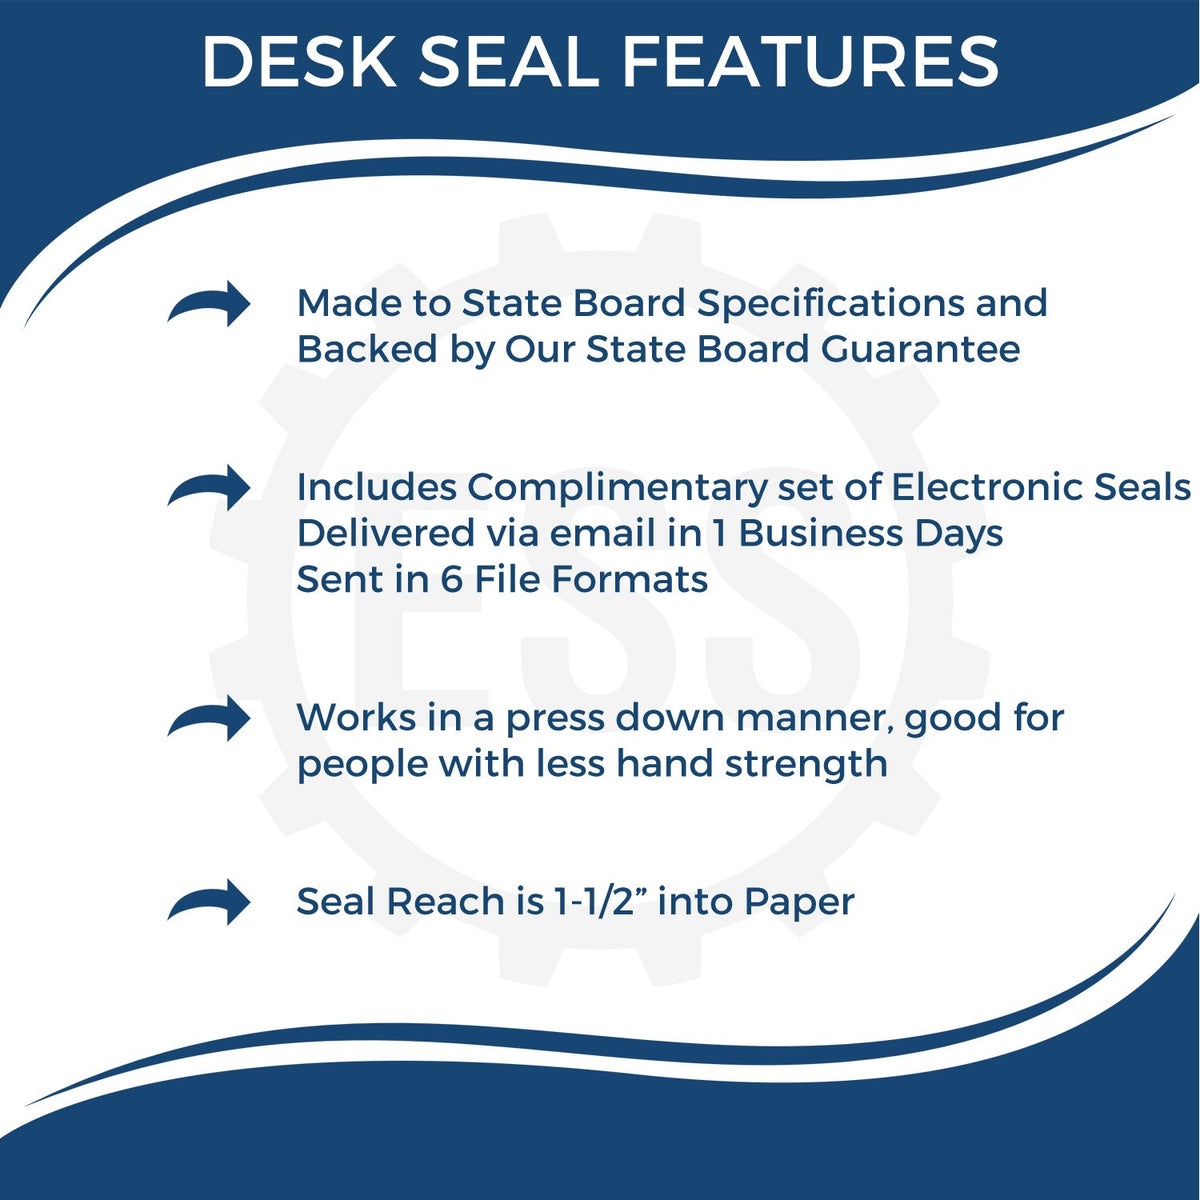 A picture of an infographic highlighting the selling points for the Wyoming Engineer Desk Seal